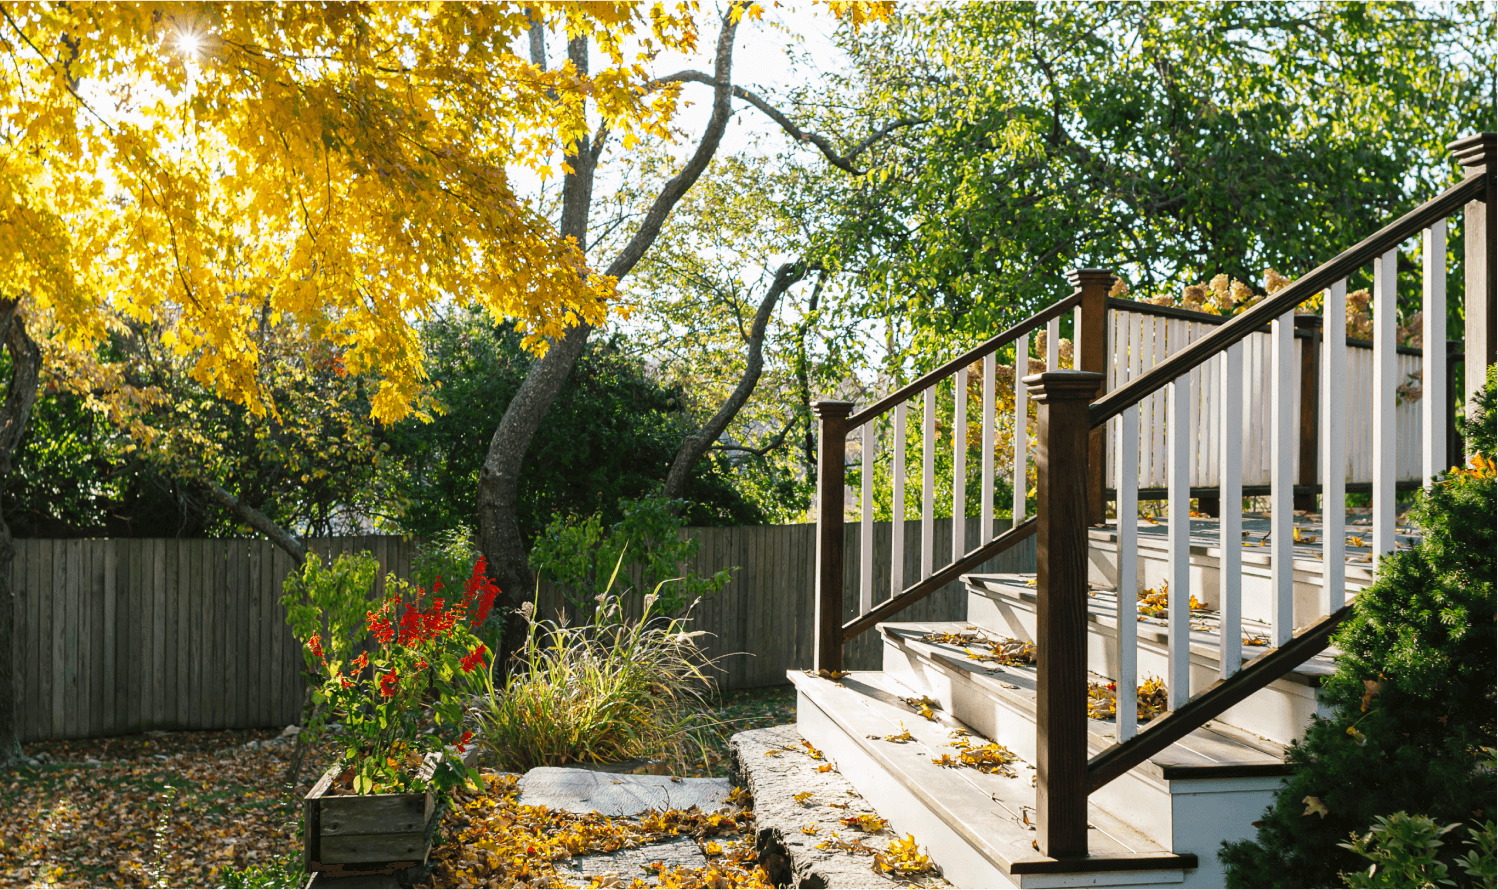 Wooden porch steps with plater boxes covered in leaves.